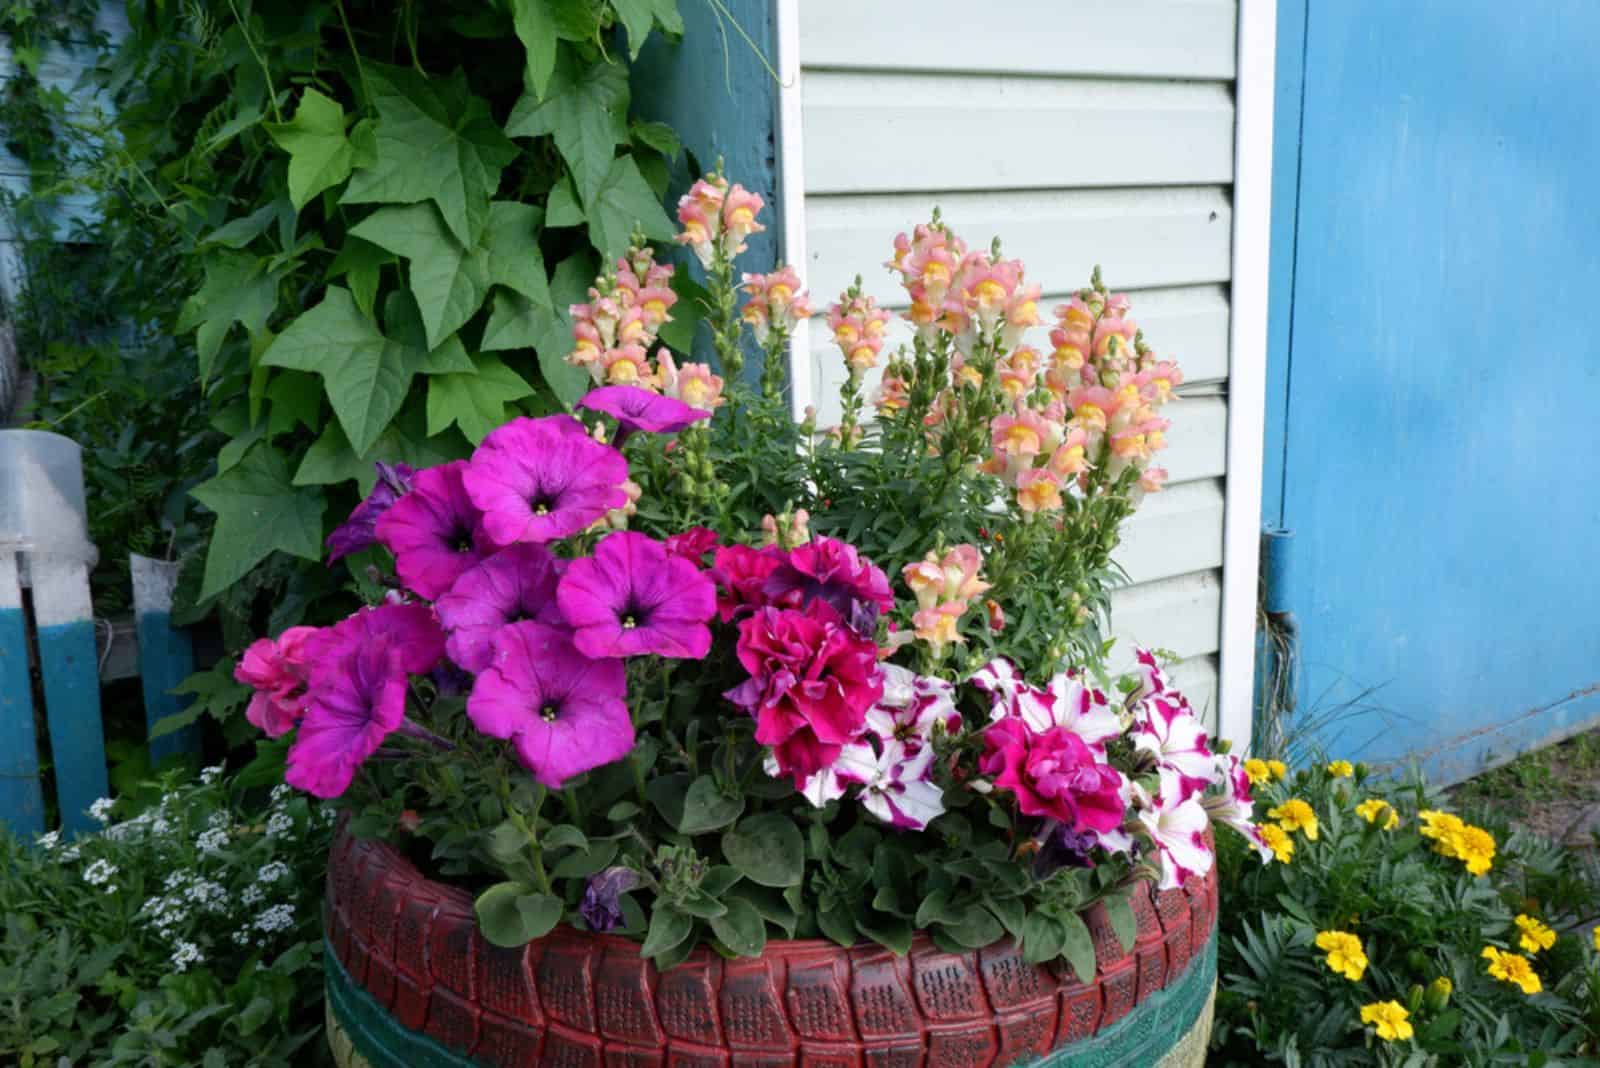 Homemade flowerbed from a car tire with flowers